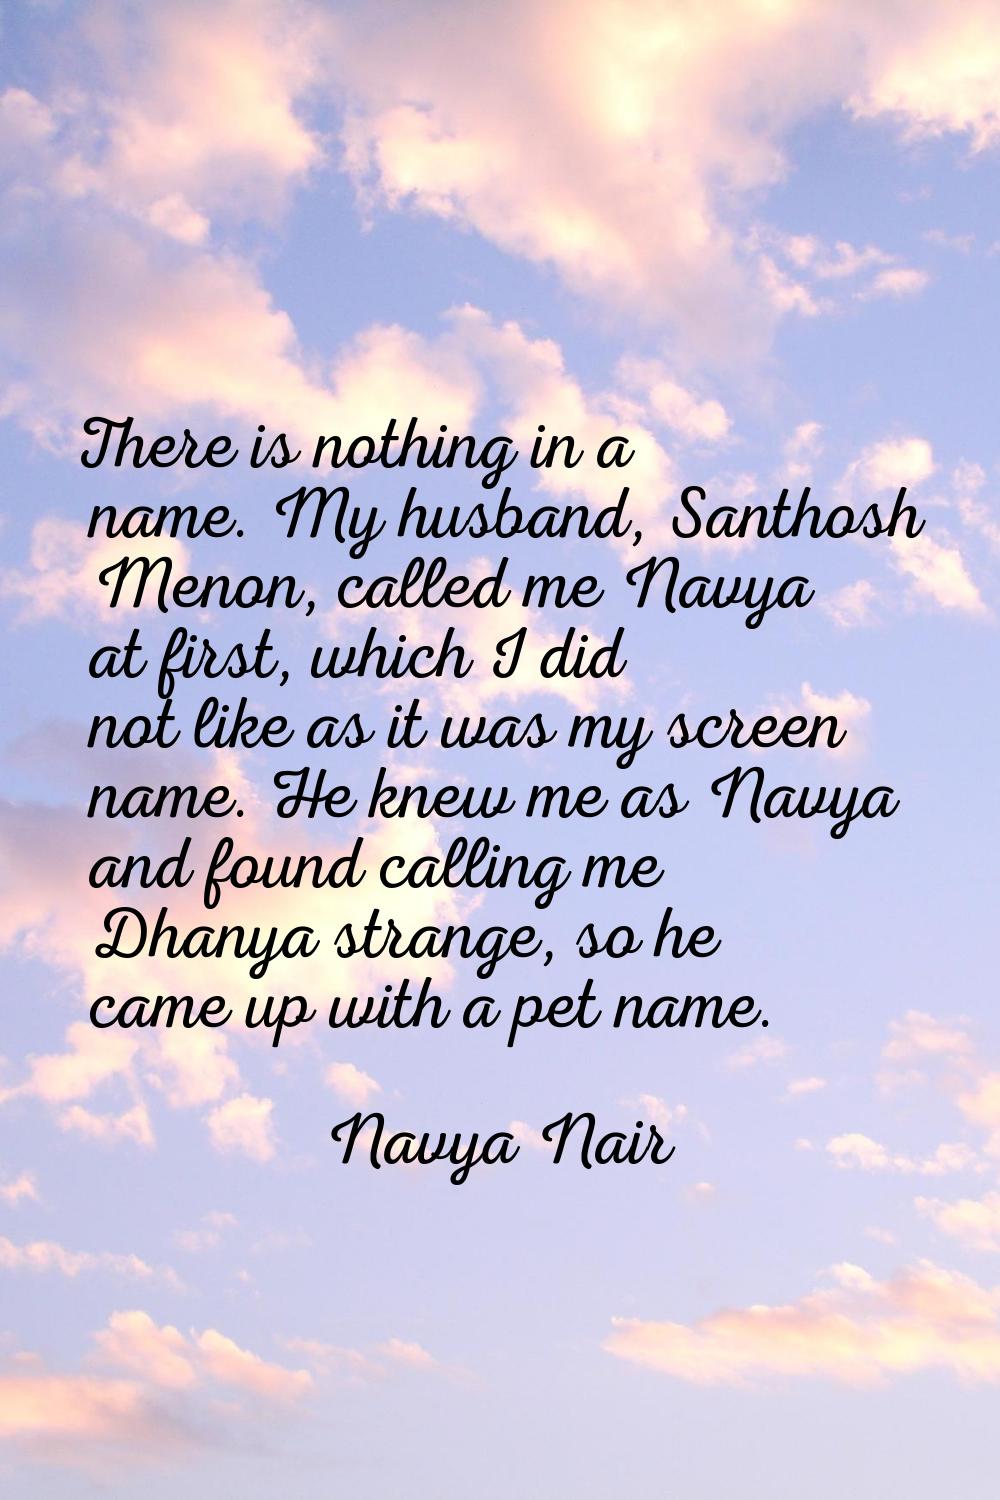 There is nothing in a name. My husband, Santhosh Menon, called me Navya at first, which I did not l